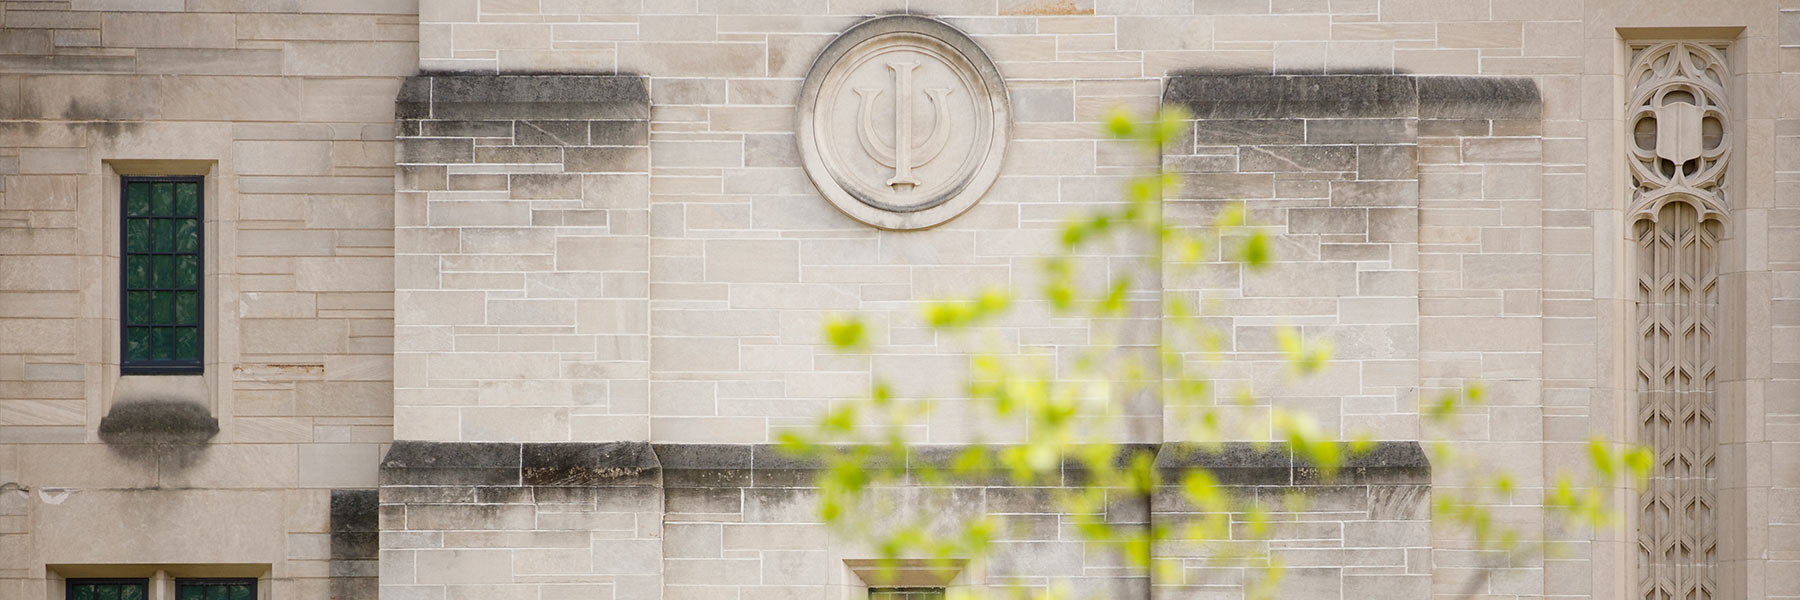 An Indiana University trident adorns the side of the IU Auditorium in spring